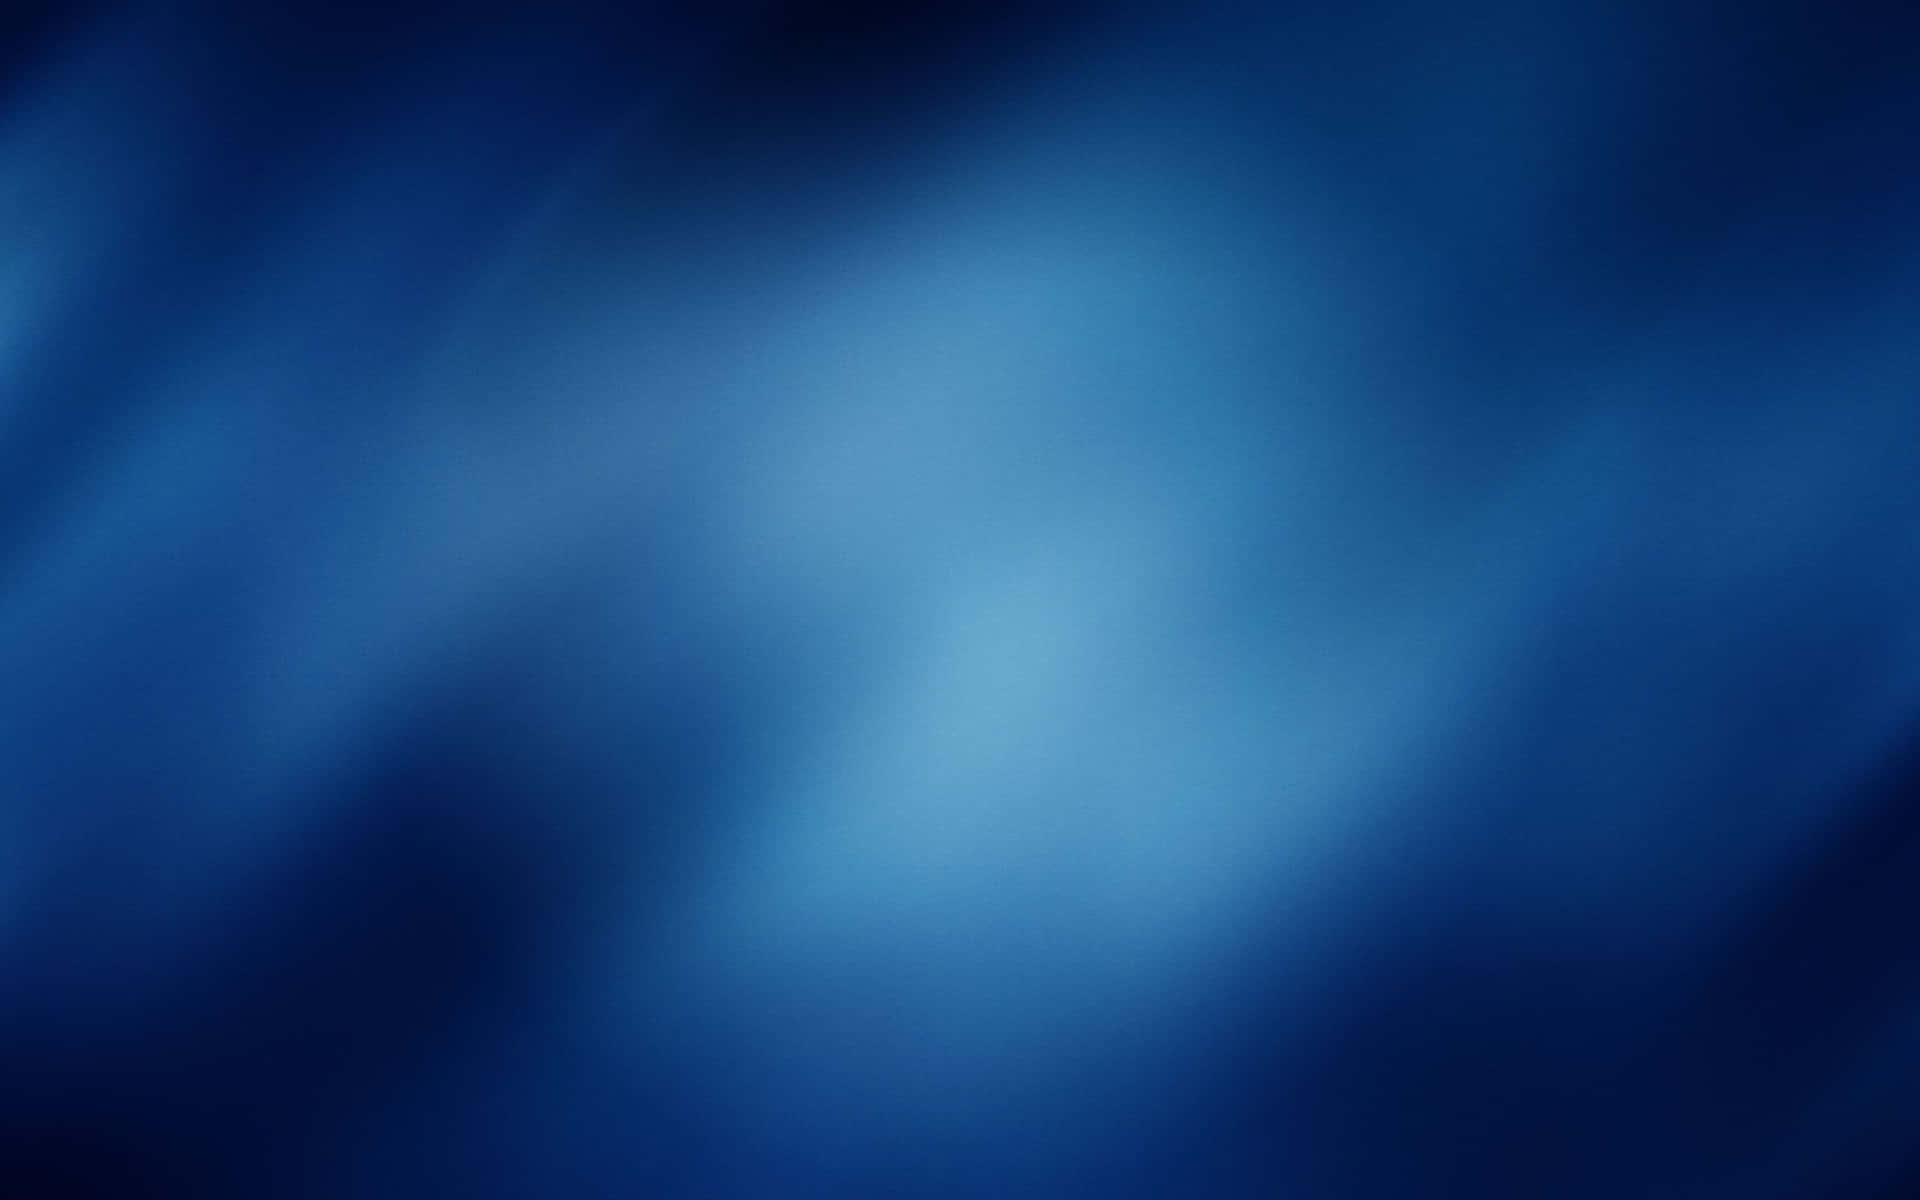 A modern blue and grey abstract design Wallpaper